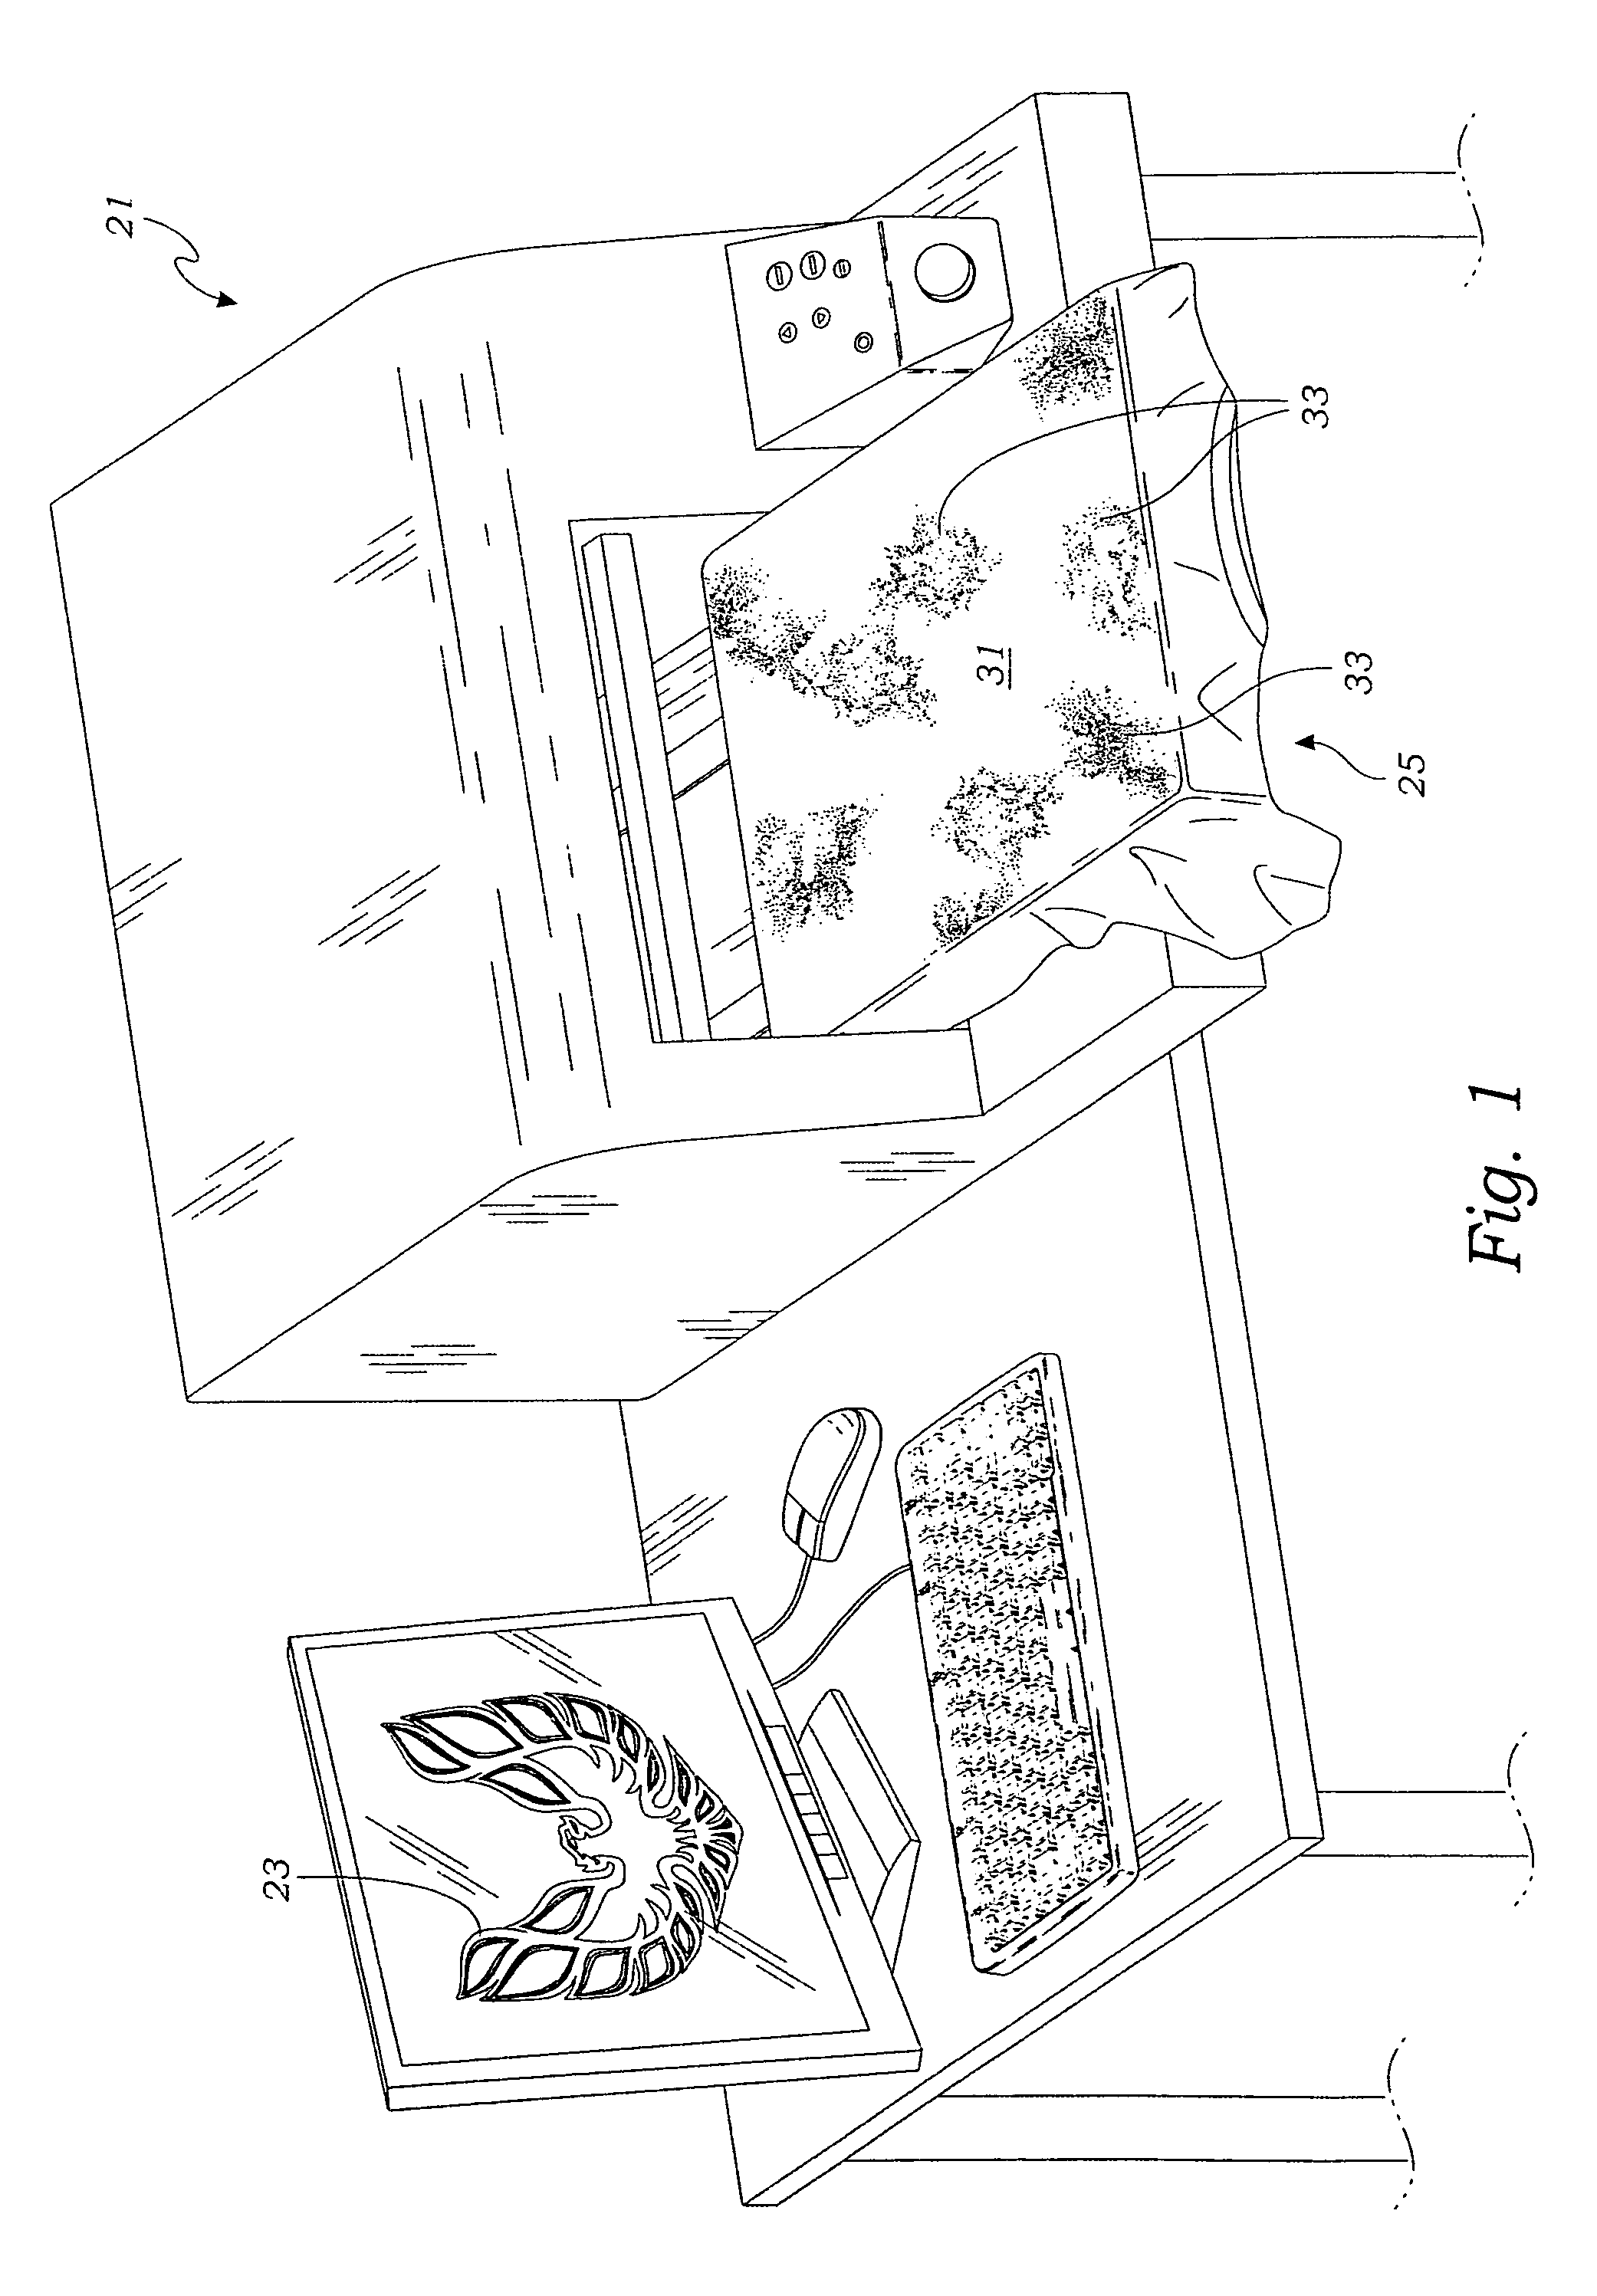 Method of printing foil images upon textiles